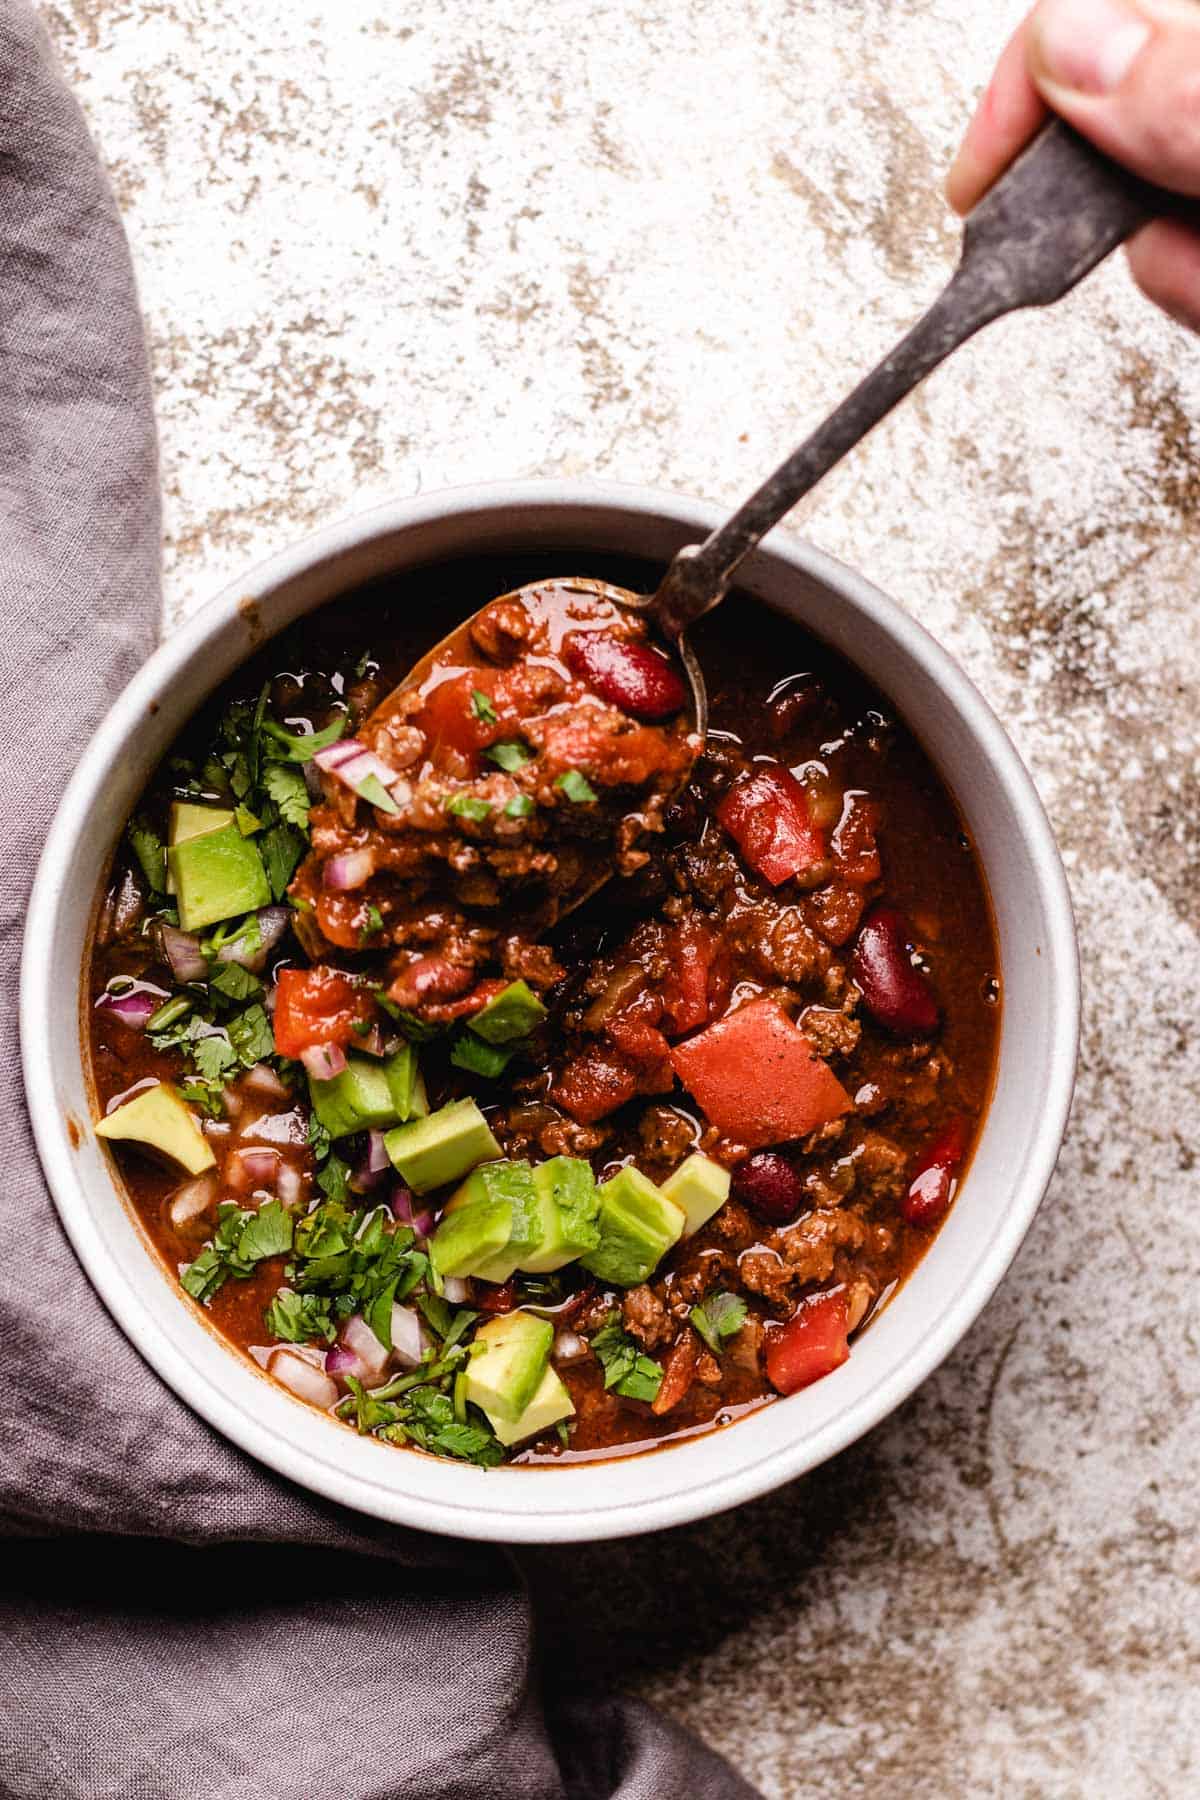 Deer chili with a spoon.